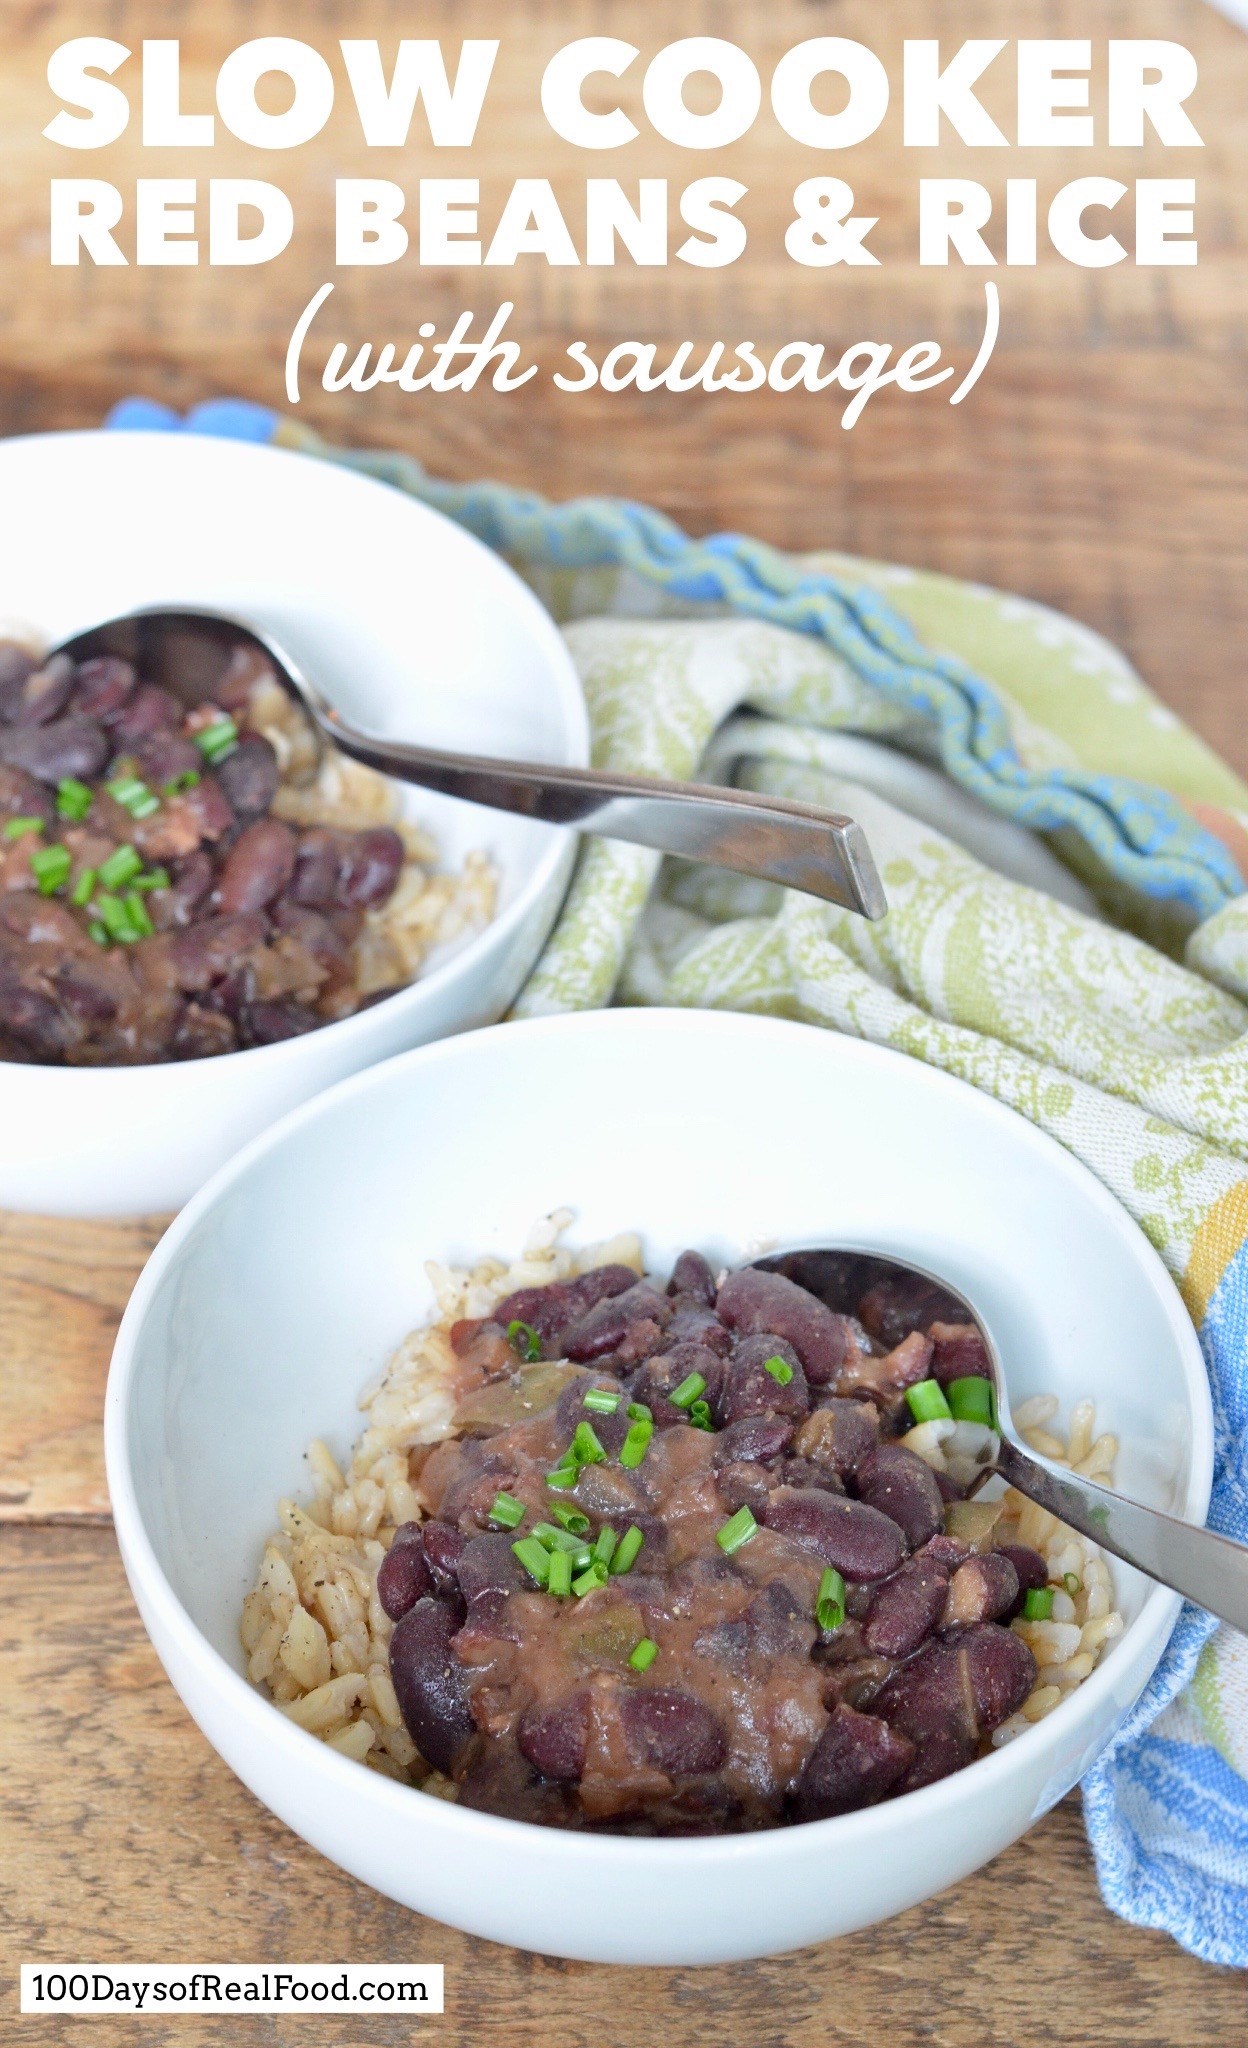 Slow Cooker Red Beans and Rice on 100 Days of Real Food